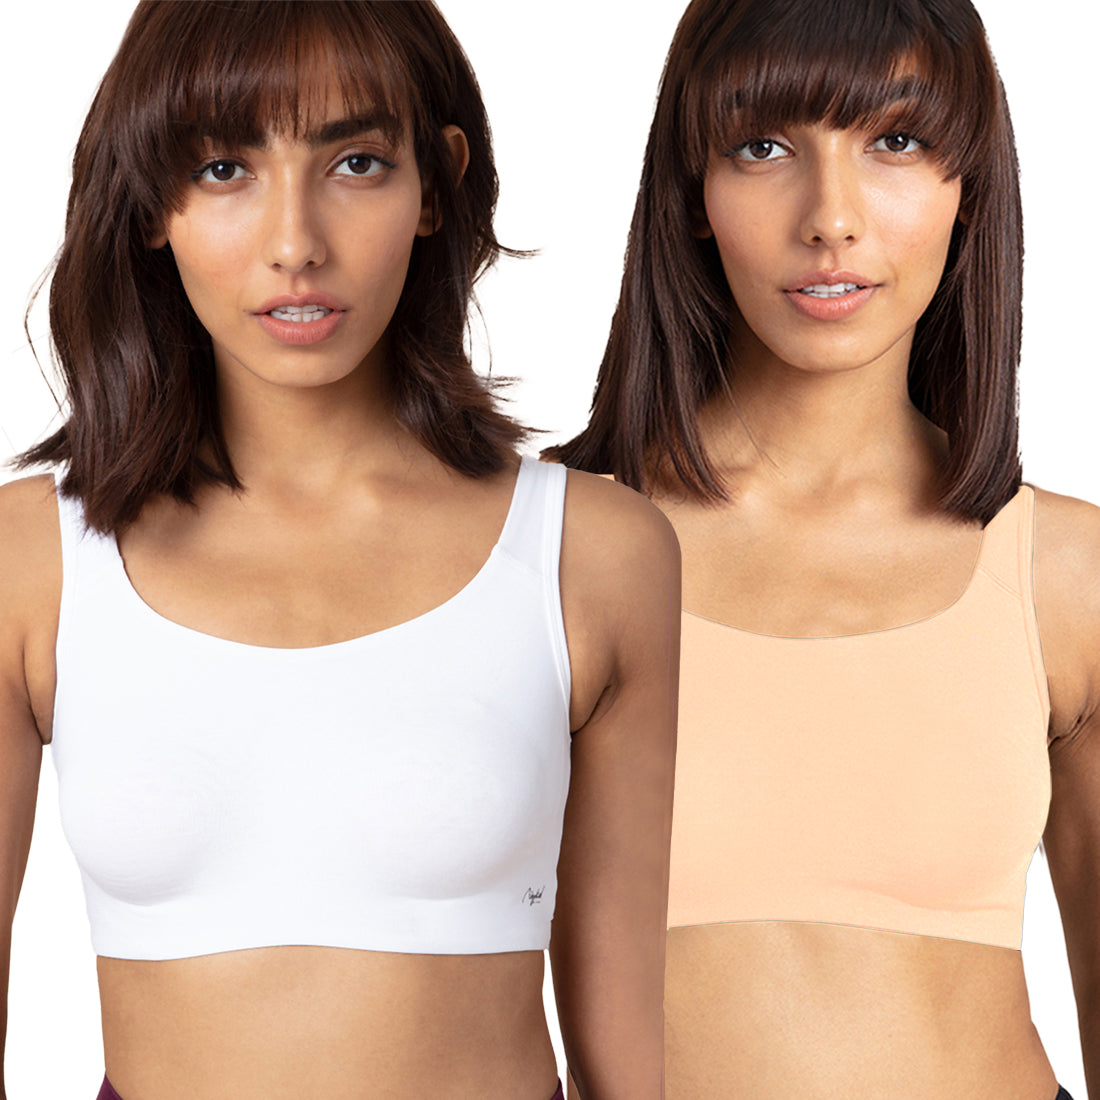 Pack of 2 Soft cup easy-peasy slip-on bra with Full coverage - NYB113 White & Skin